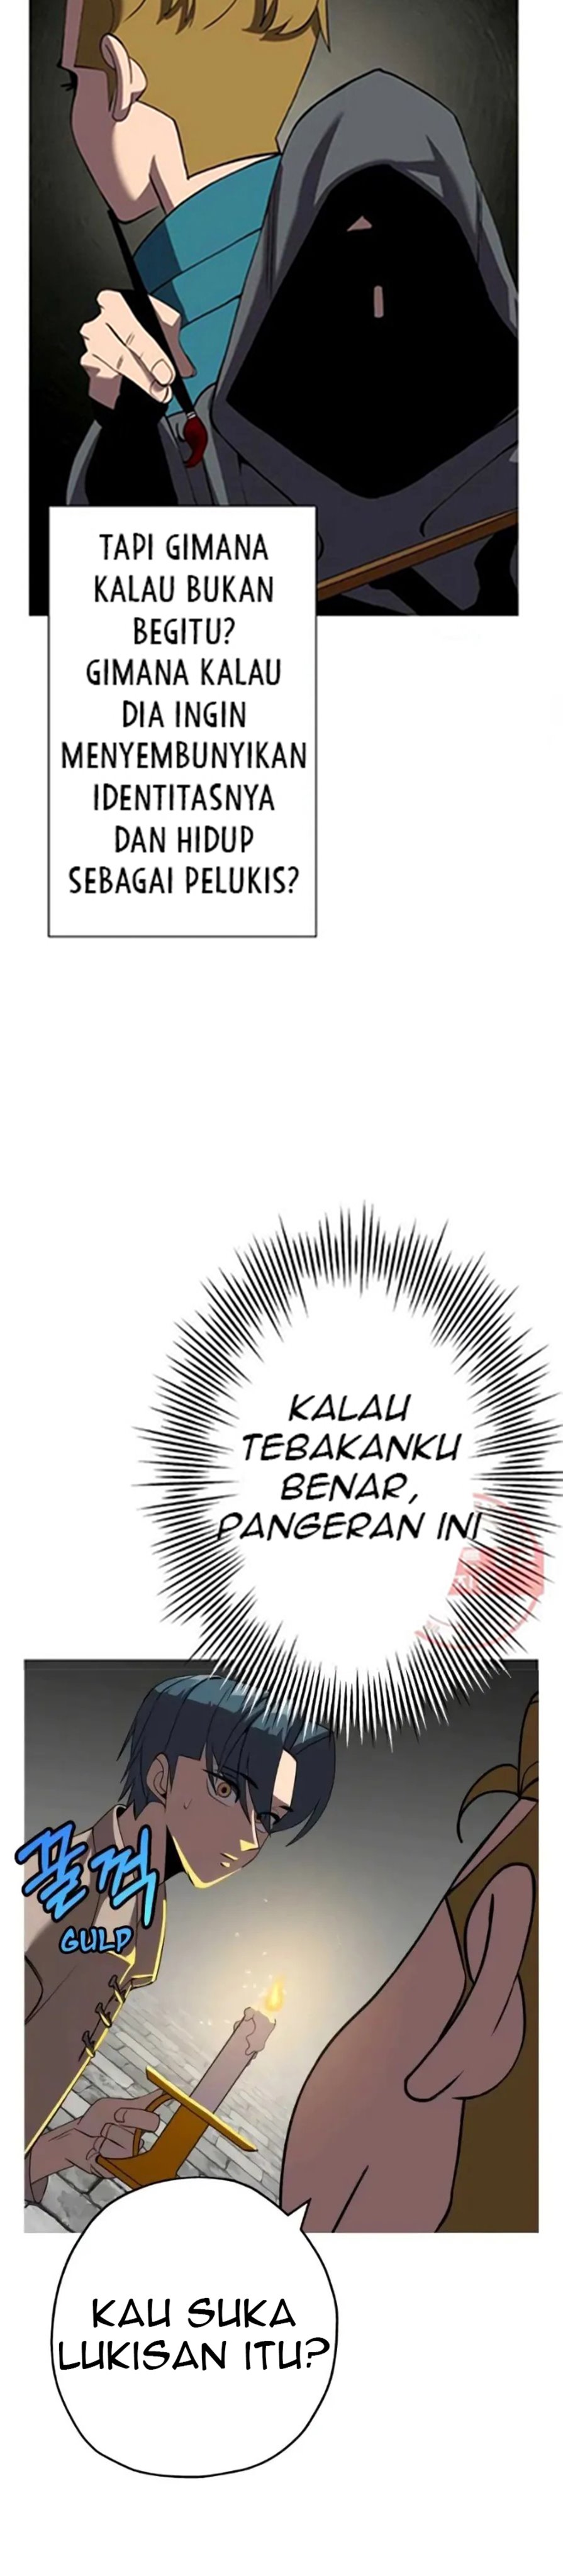 Dilarang COPAS - situs resmi www.mangacanblog.com - Komik the story of a low rank soldier becoming a monarch 058 - chapter 58 59 Indonesia the story of a low rank soldier becoming a monarch 058 - chapter 58 Terbaru 21|Baca Manga Komik Indonesia|Mangacan